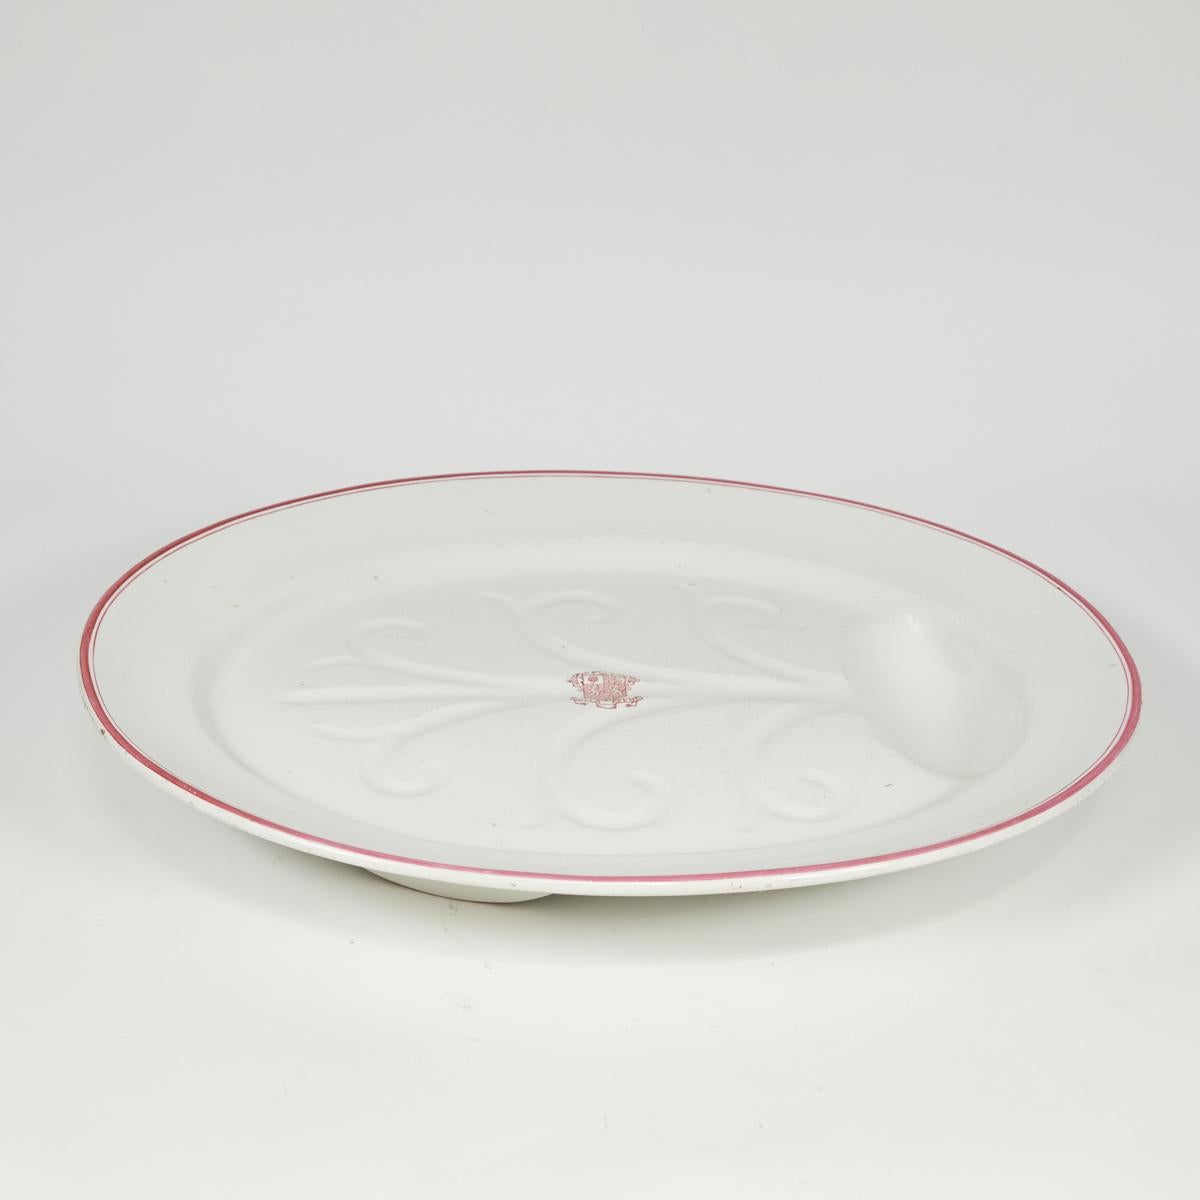 English late 19th-century white porcelain oval serving platter with delicate pink trim. The base features a small indentation to catch sauce and drippings, and is accented by a simplified palmette carving. An elegant rose-colored armorial insignia